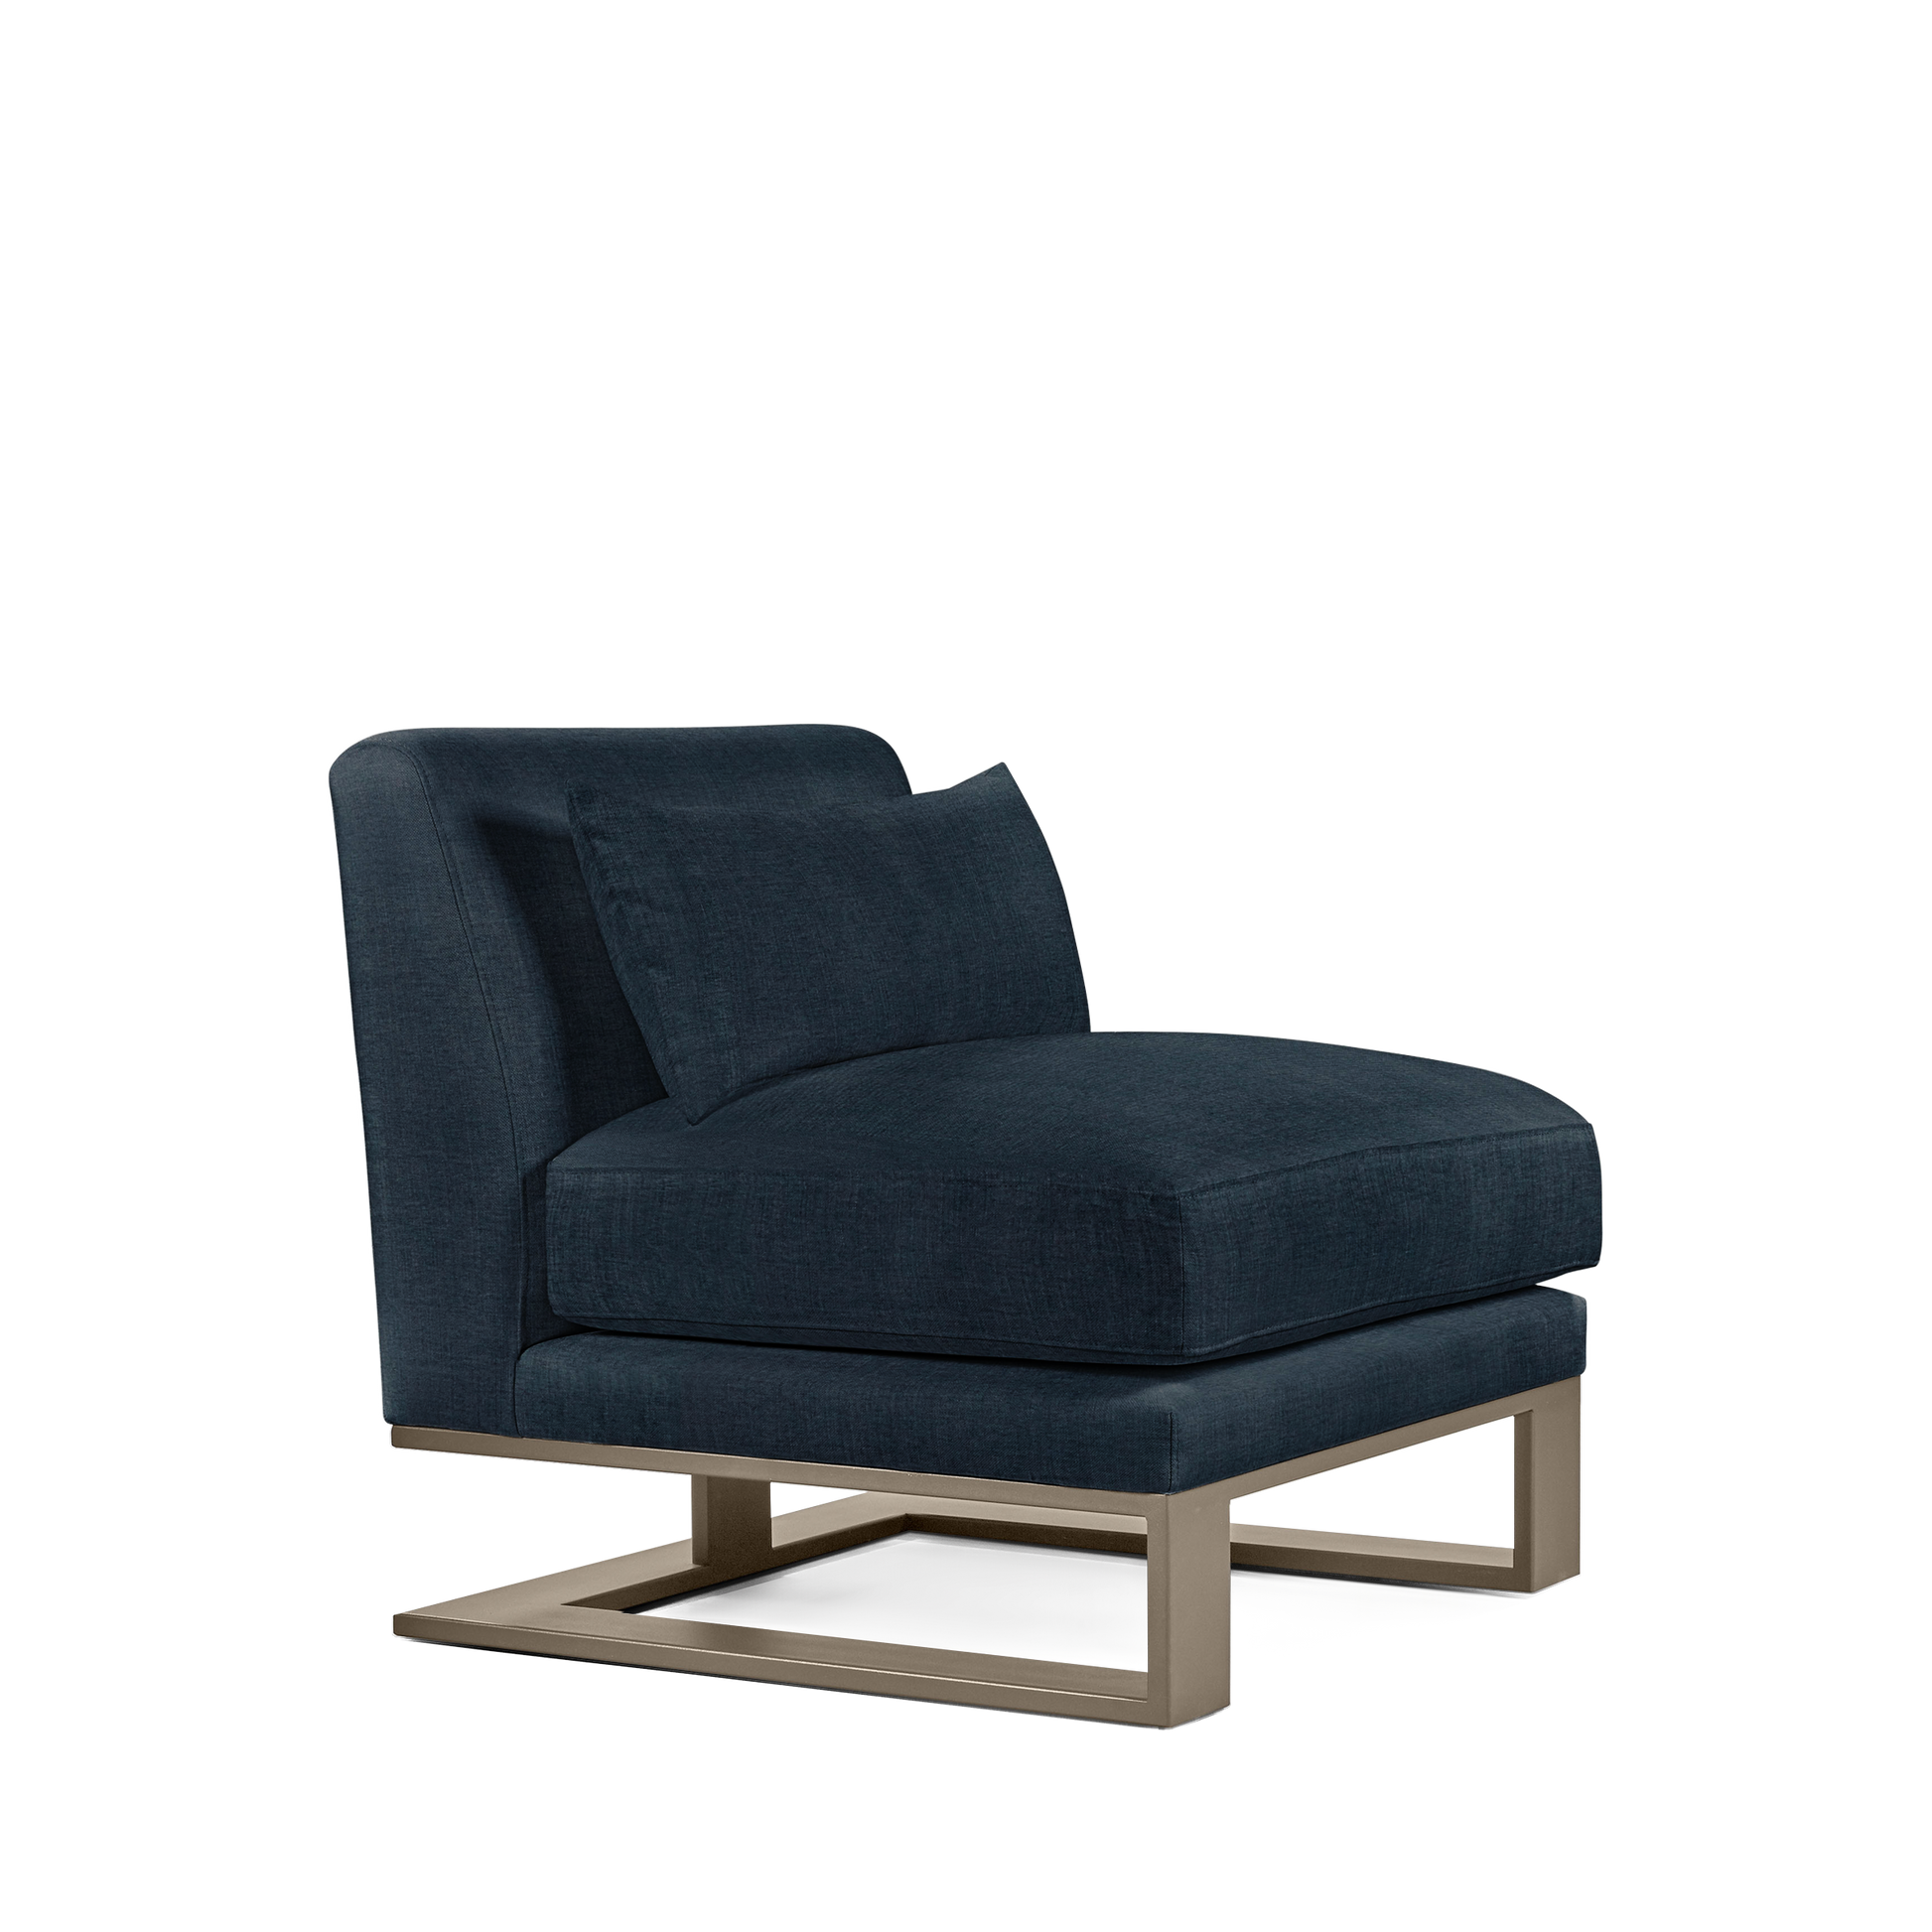 Alpes armchair with dark blue textile and champagne colored wood legs 